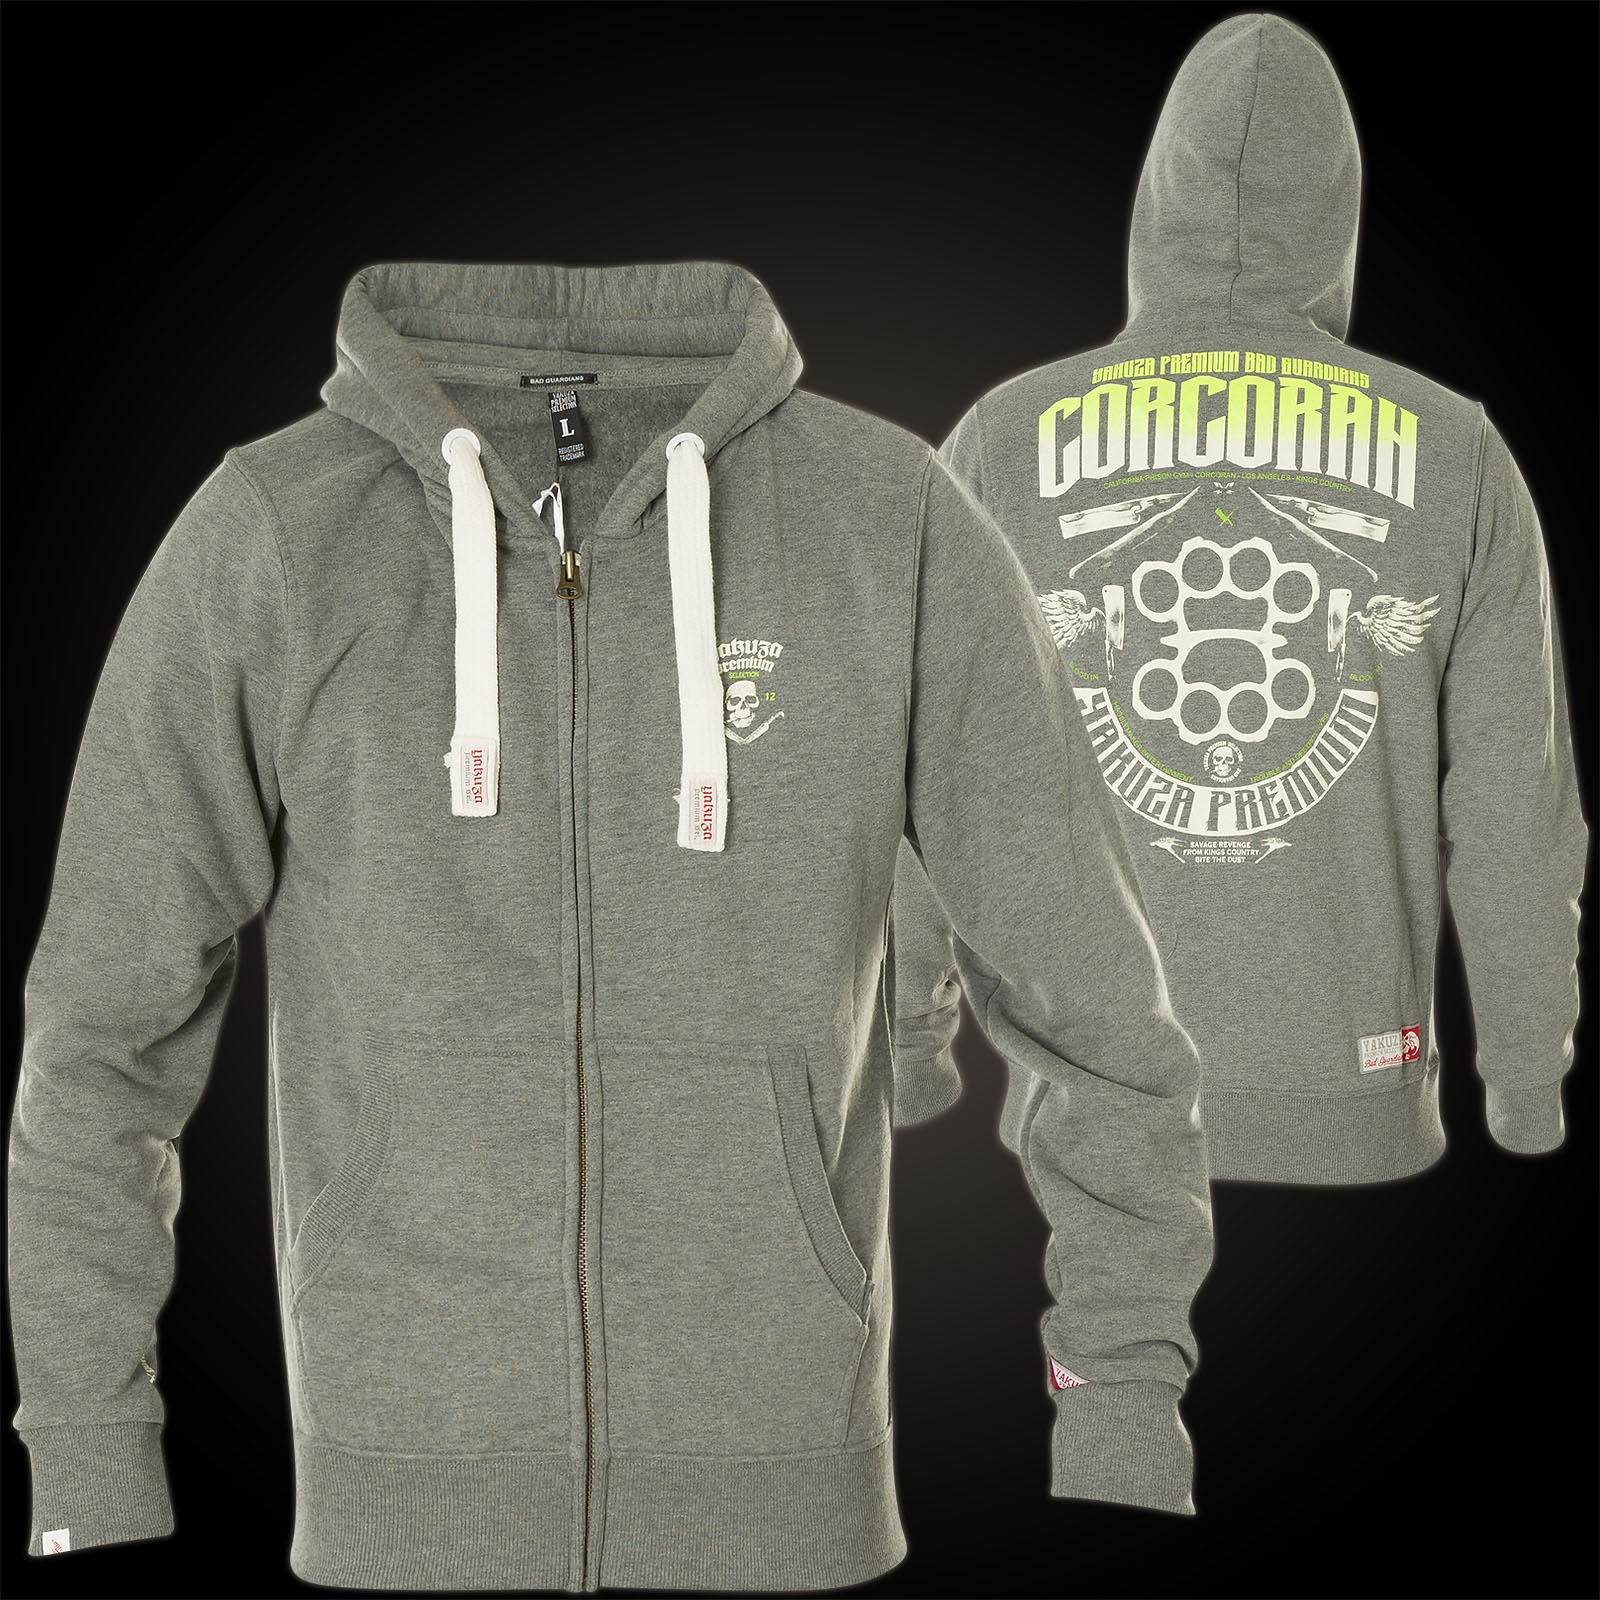 Yakuza Premium YPHZ-2226 Hoodie featuring a skull and knuckle dusters